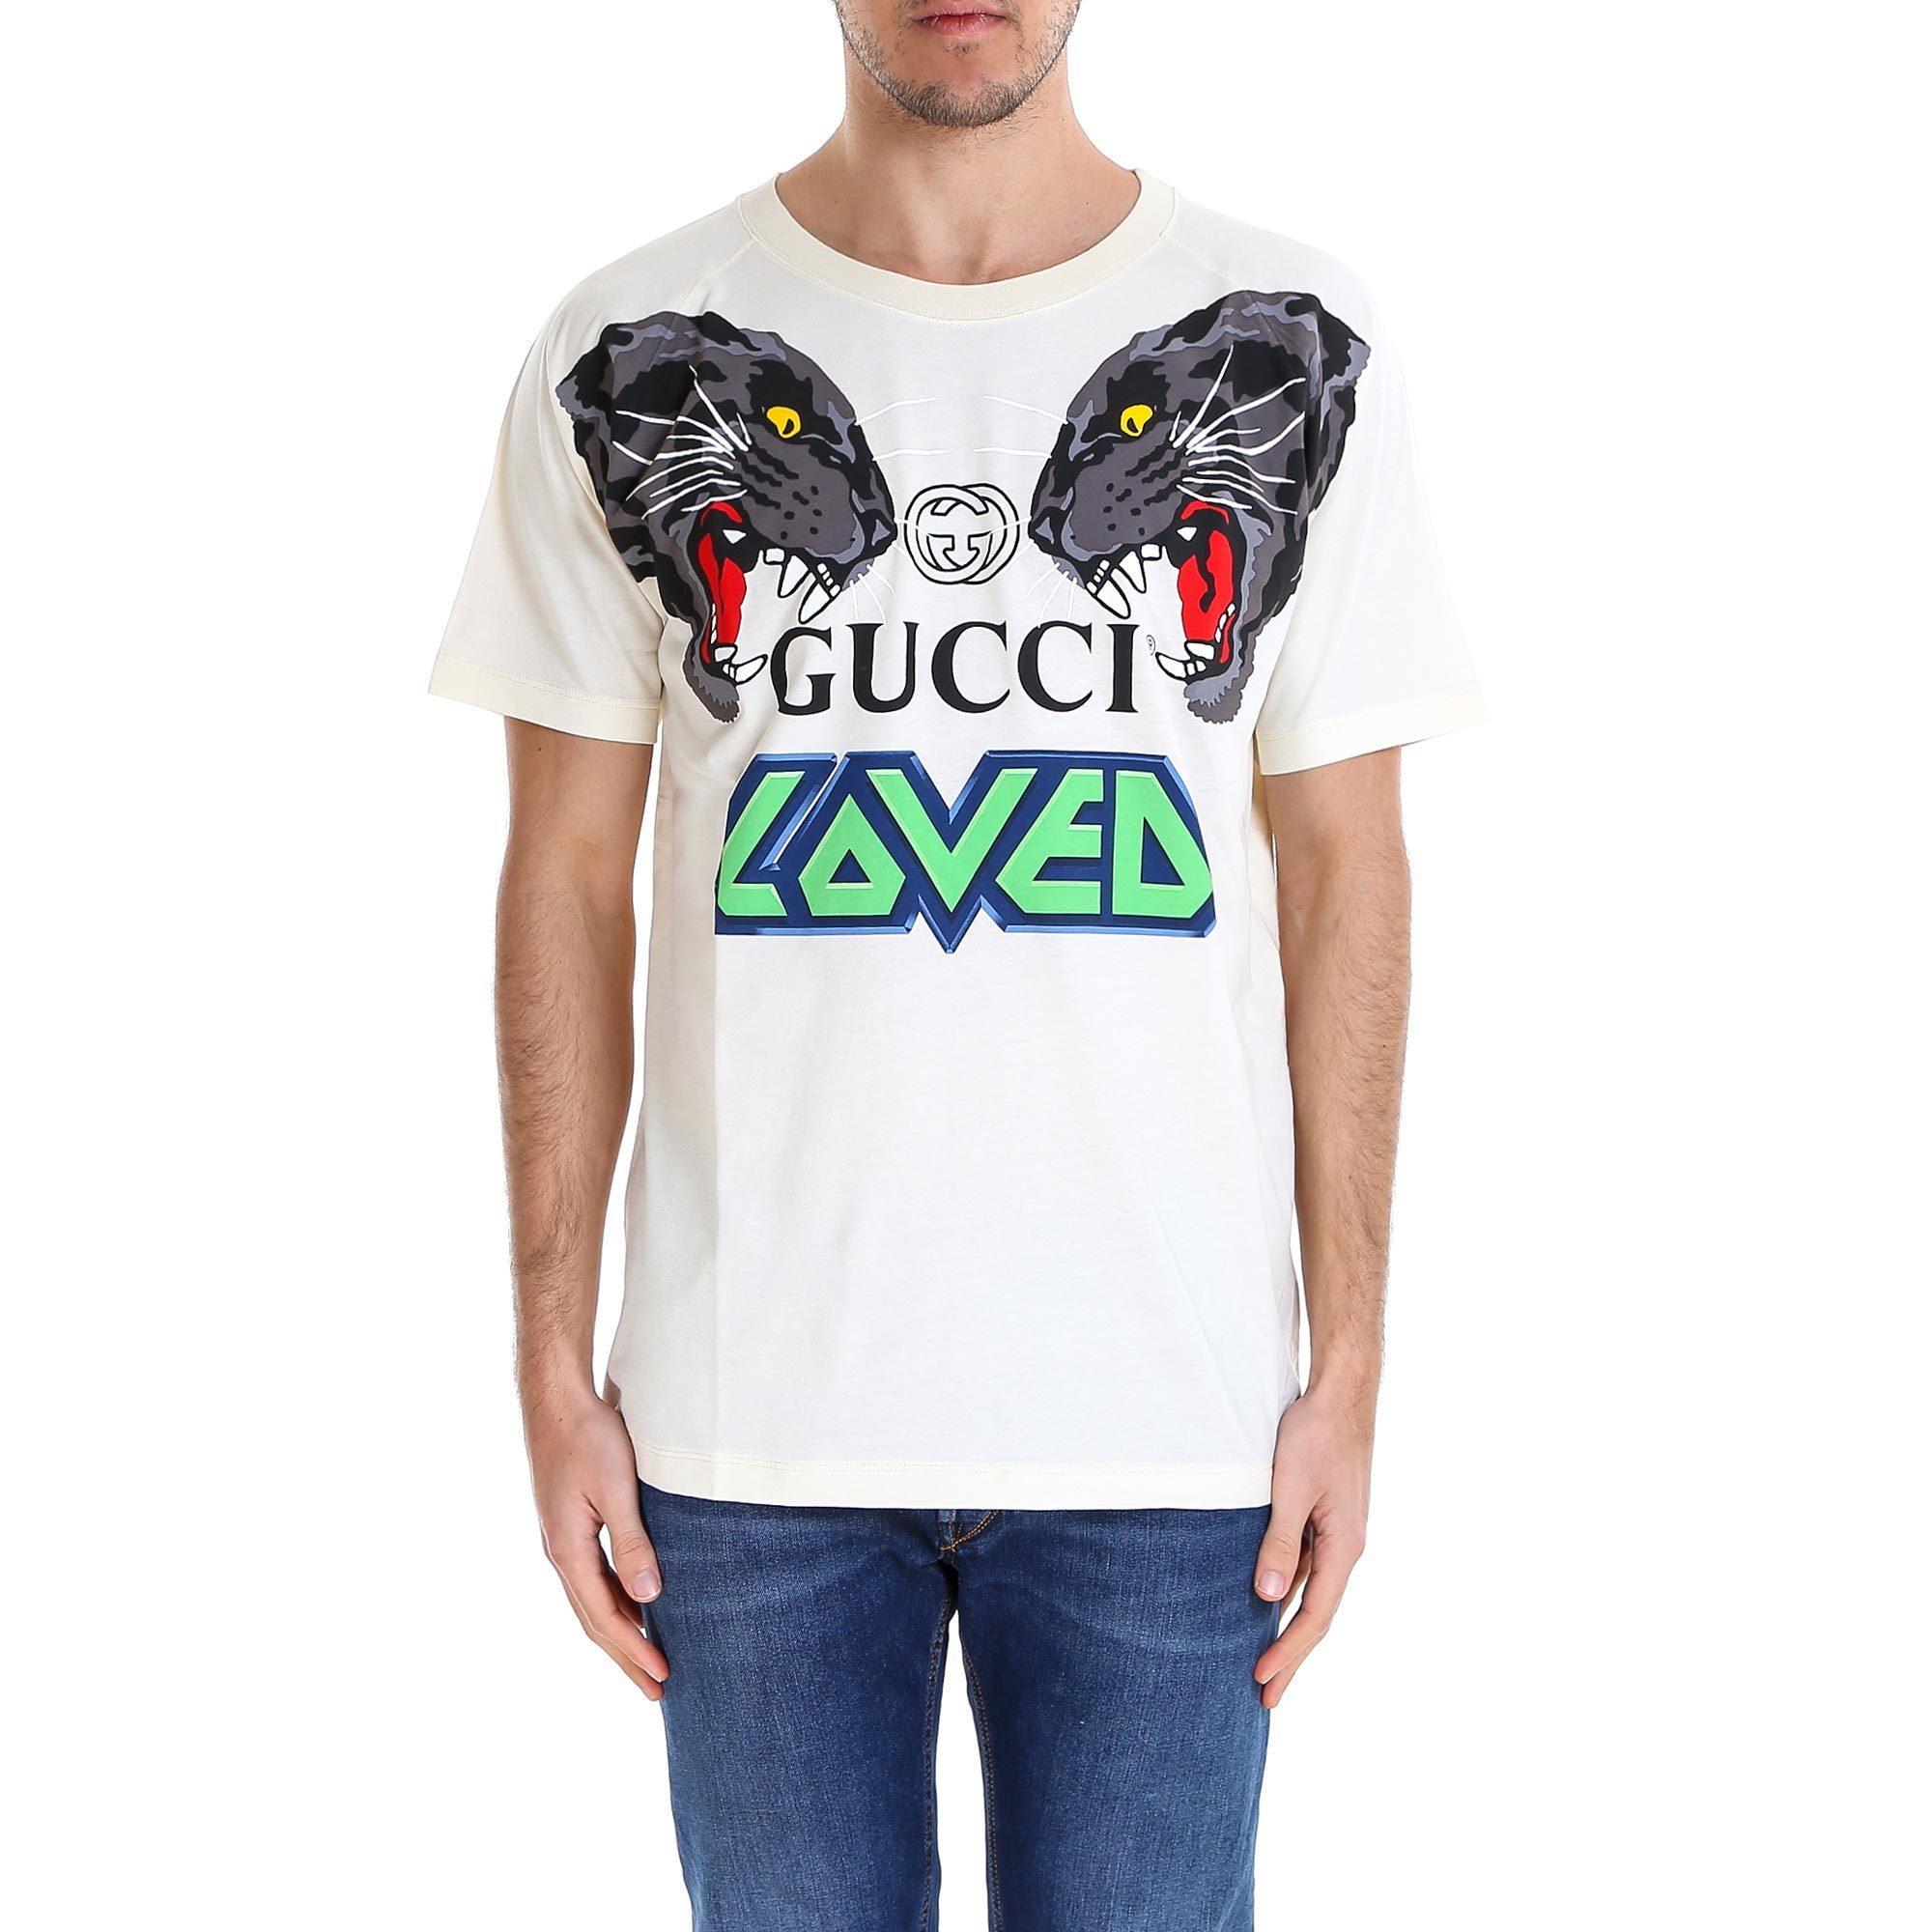 Gucci Cotton Loved Raglan T Shirt in White for Men - Lyst